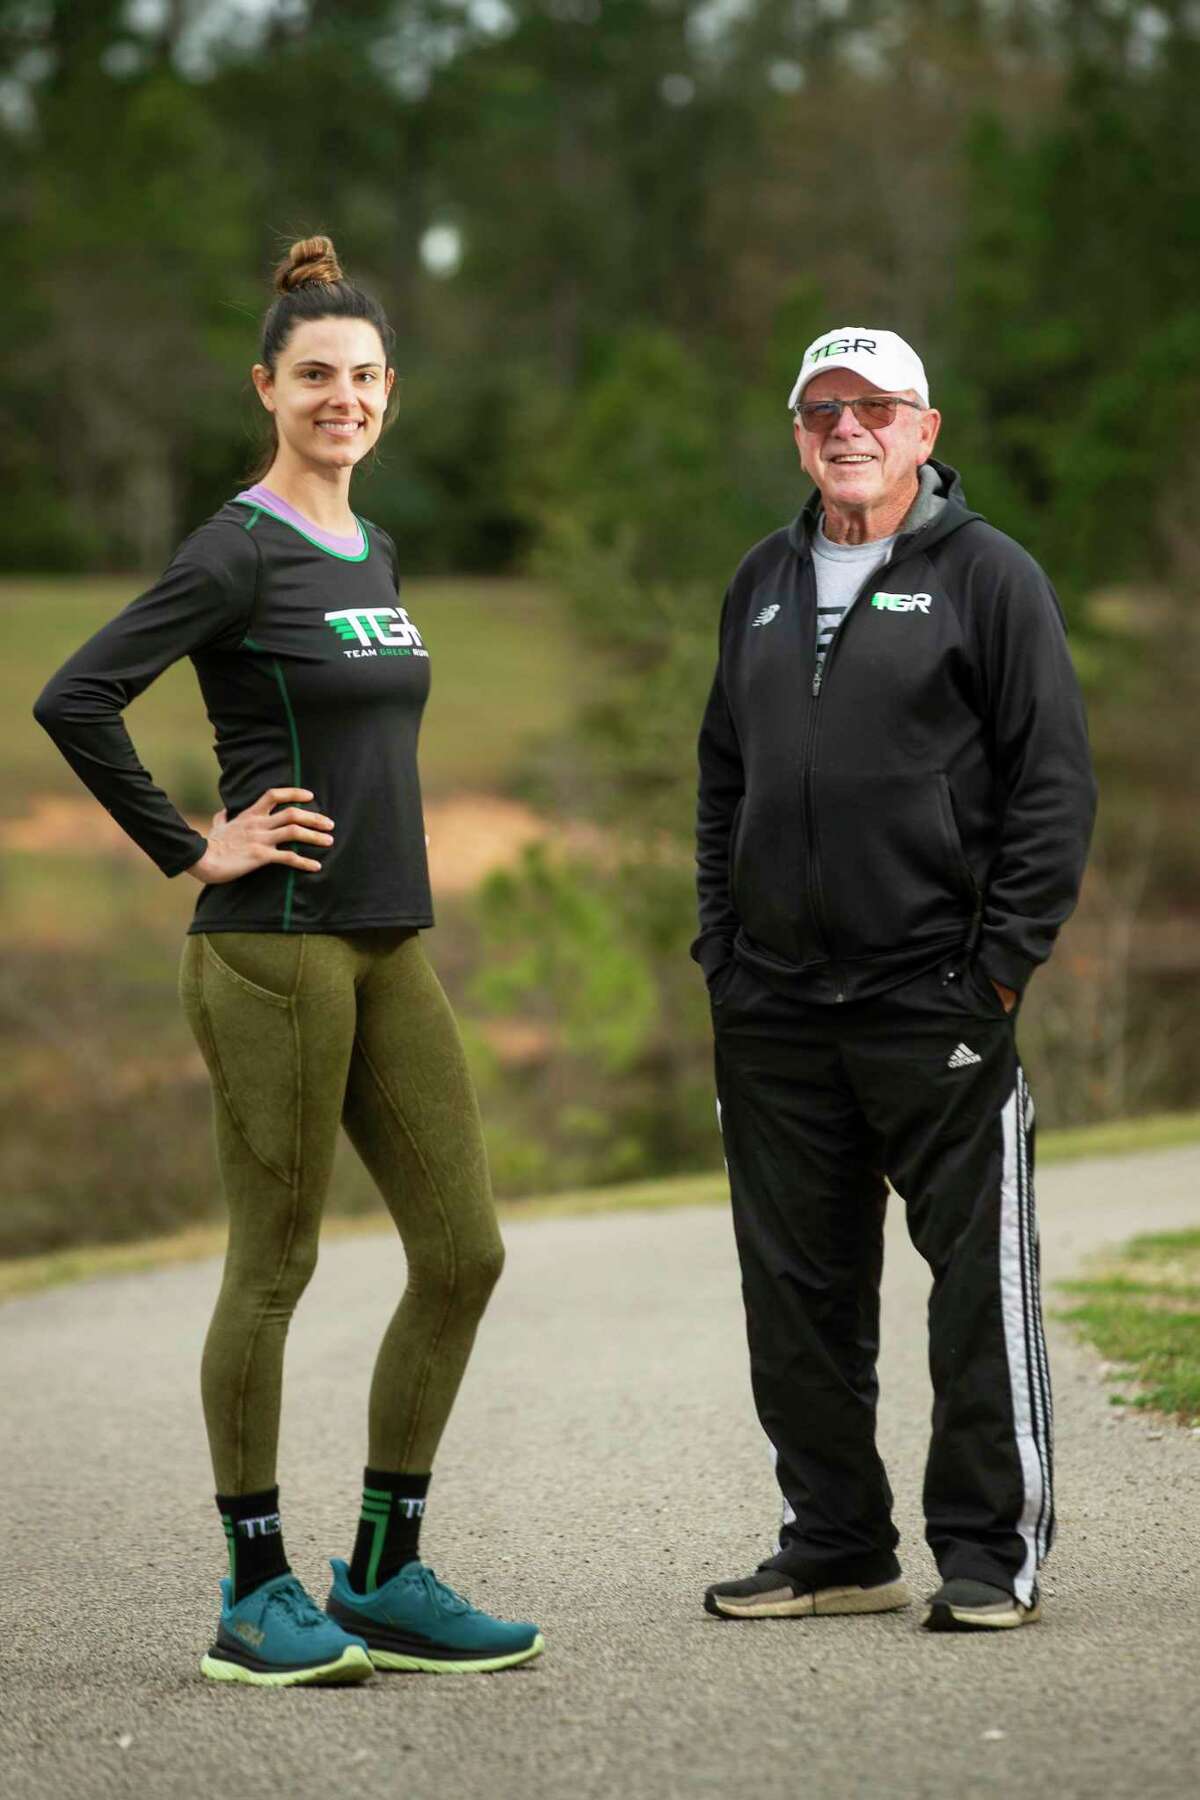 First-time marathon runner Tiffany Moran, left, and her coach Dan Green pose for a portrait before a training session Wednesday, Jan. 12, 2022 in The Woodlands. Green, who was the first winner of the Houston Marathon in 1972 and long-time track and cross country coach at McCullough and The Woodlands High School, now coaches runners from all different skill levels through Team Green Running.